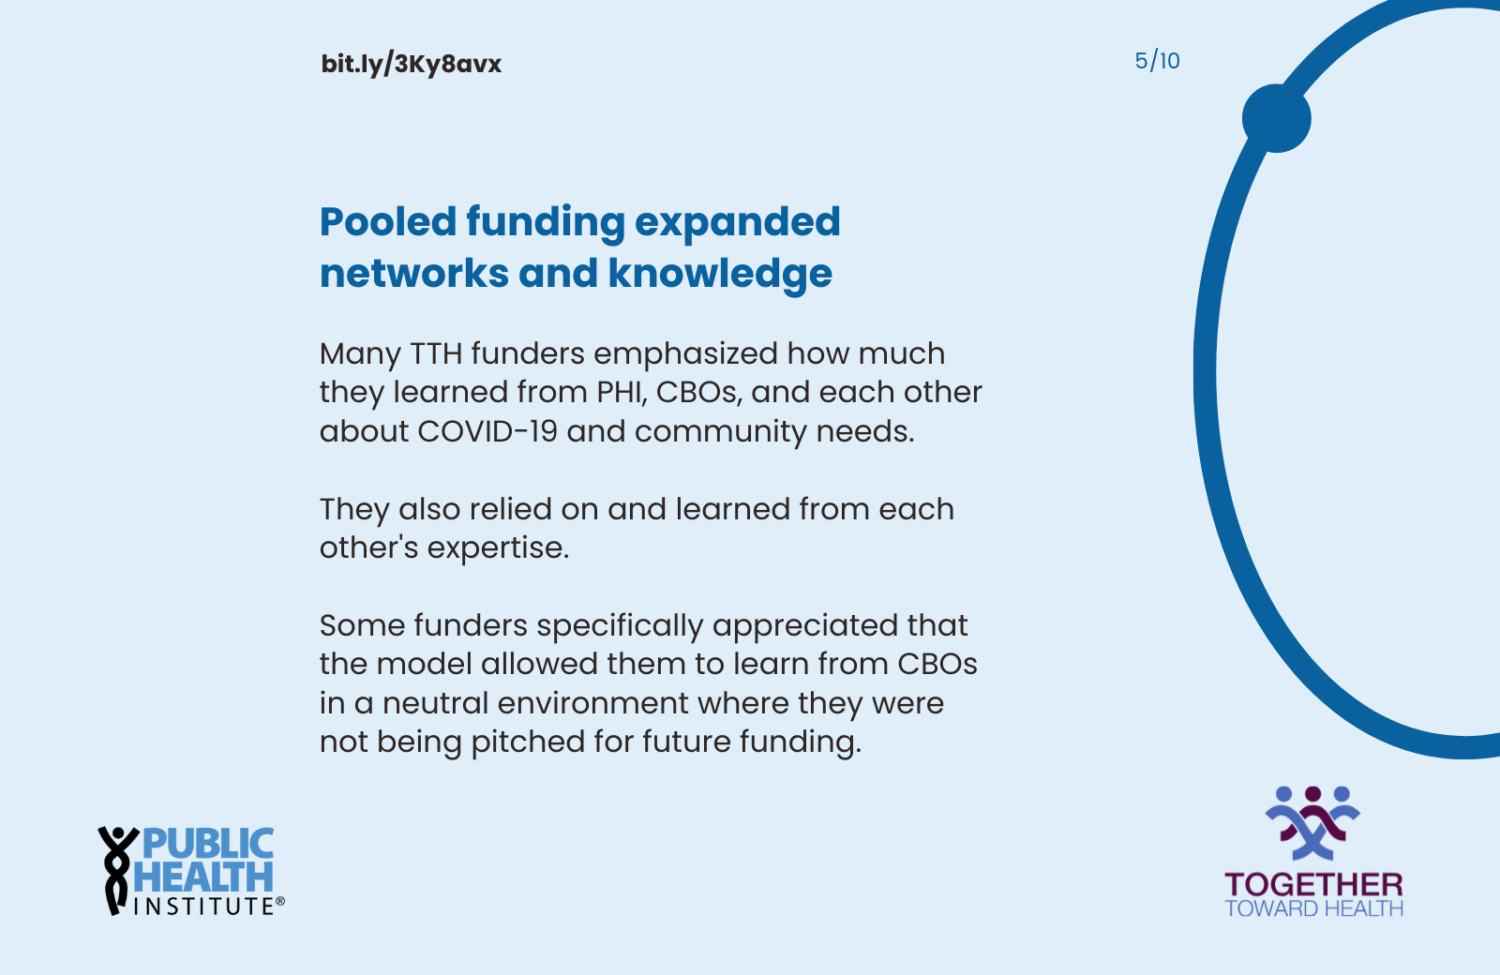 Many TTH funders emphasized how much they learned from PHI, CBOs, and each other about COVID-19 and community needs. They also relied on and learned from each other's expertise. Some funders specifically appreciated that the model allowed them to learn from CBOs in a neutral environment where they were not being pitched for future funding.